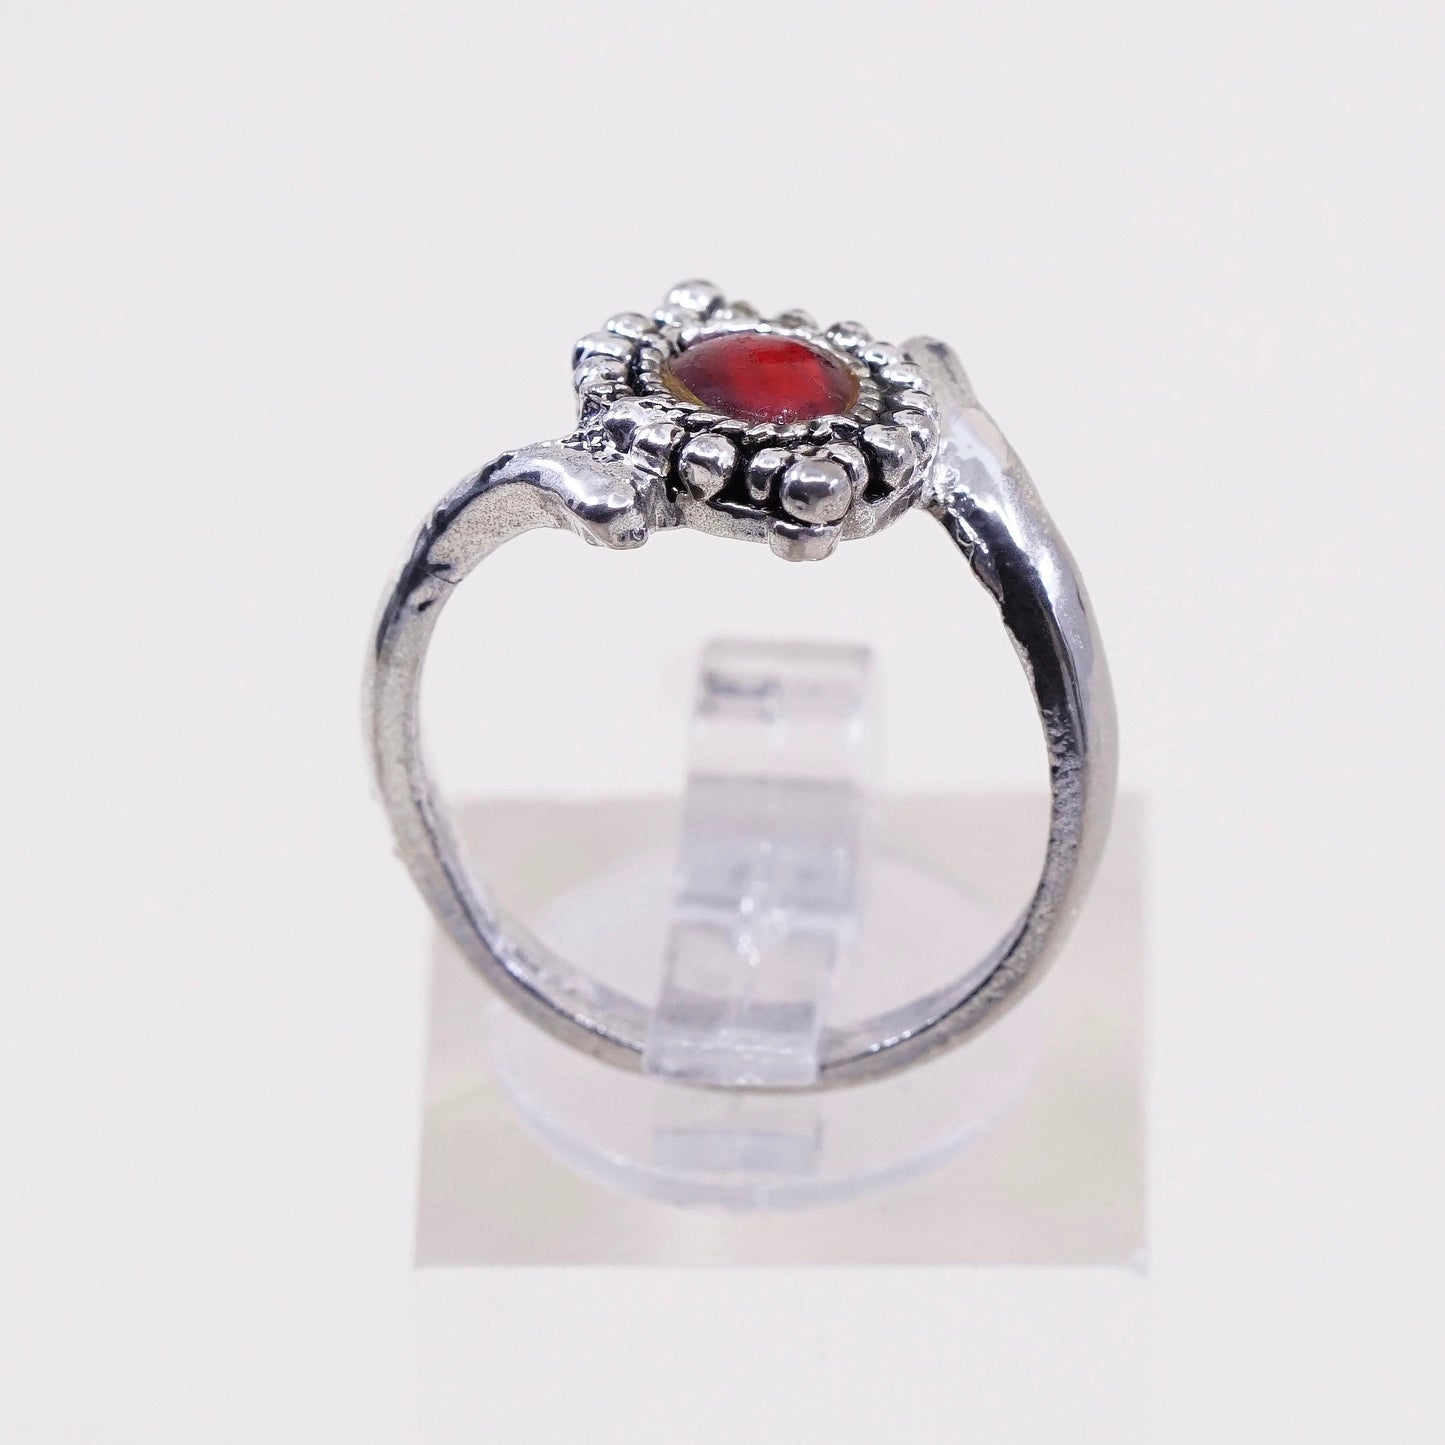 Size 7.5, vintage modern silver tone ring w/ red glass details